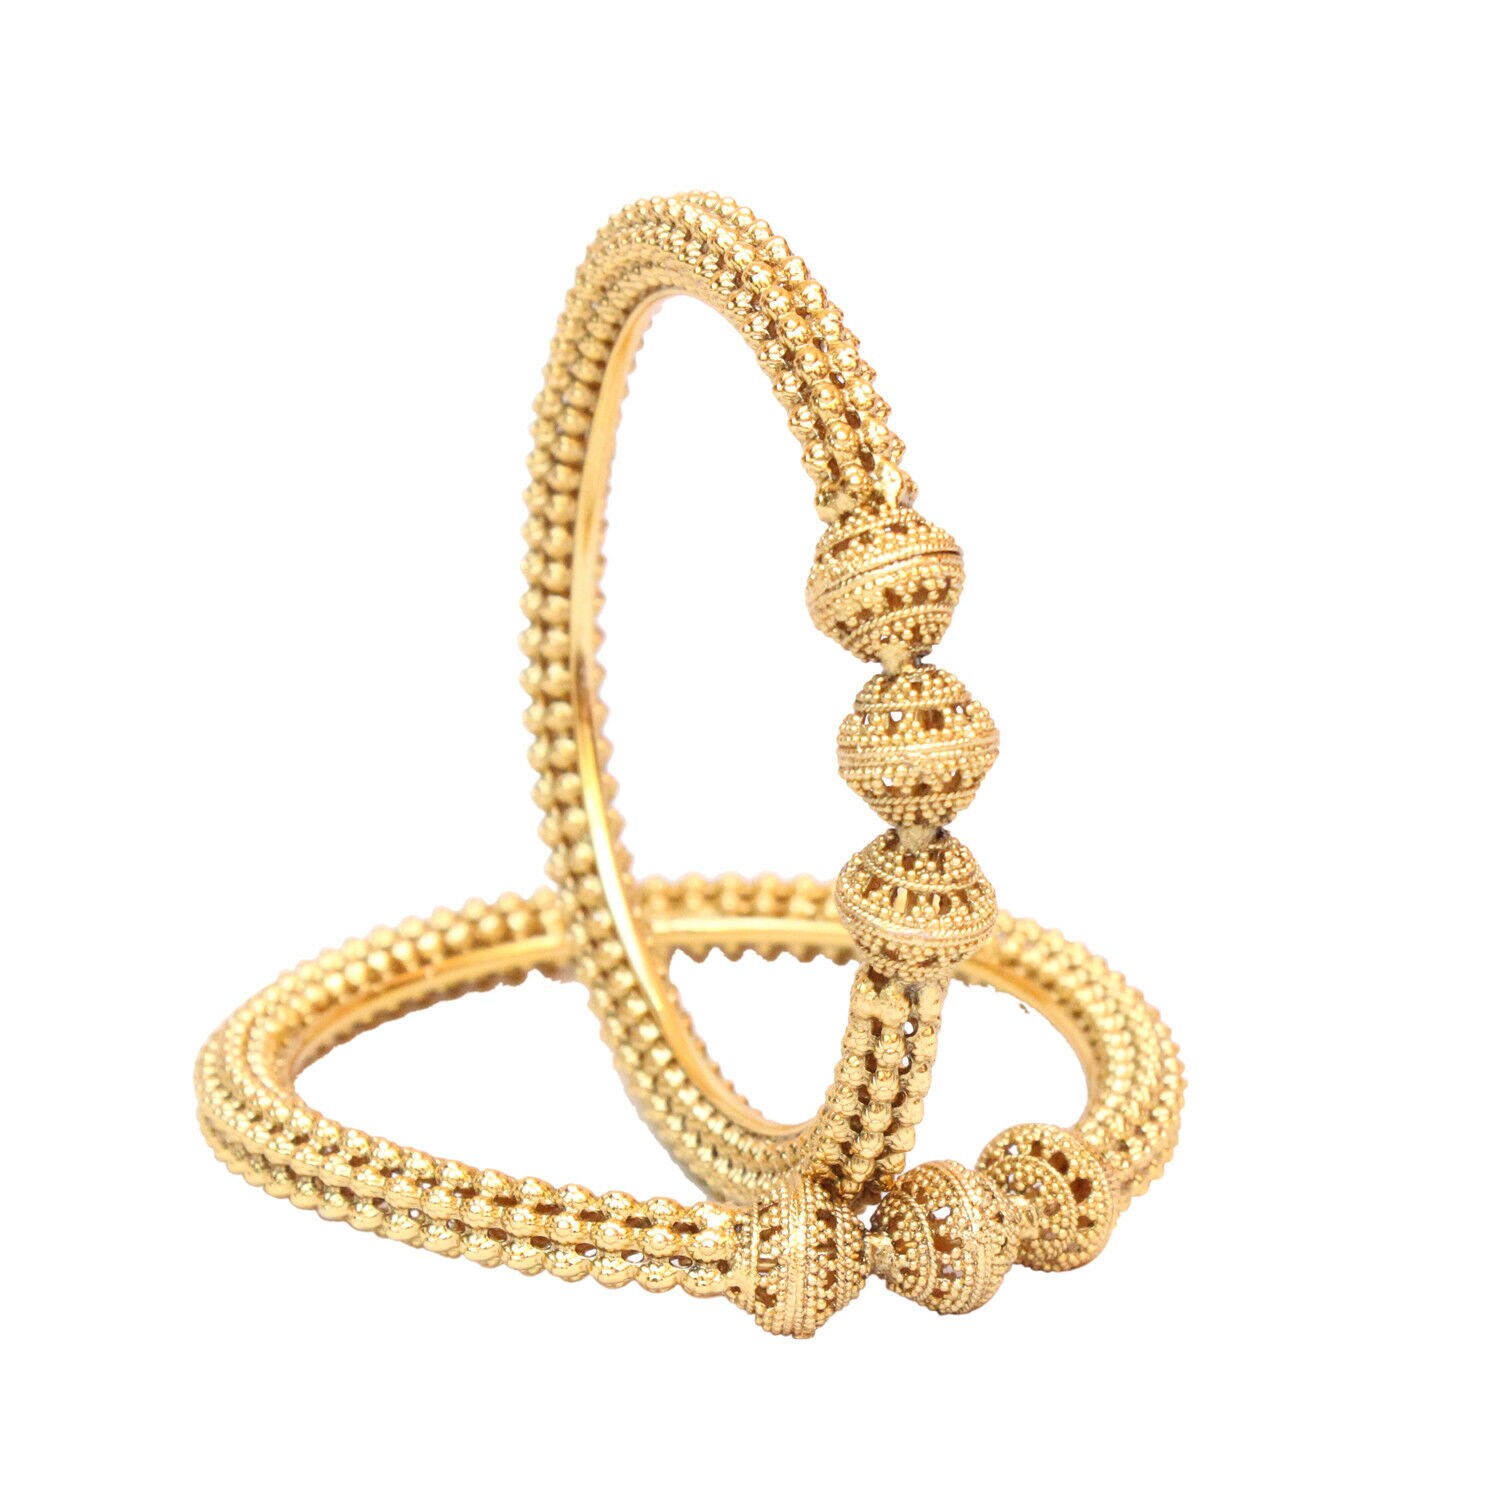 Details about   Traditional Bracelet Bollywood Fashion Gold Plated Polki Indian Bangle  Jewelry 